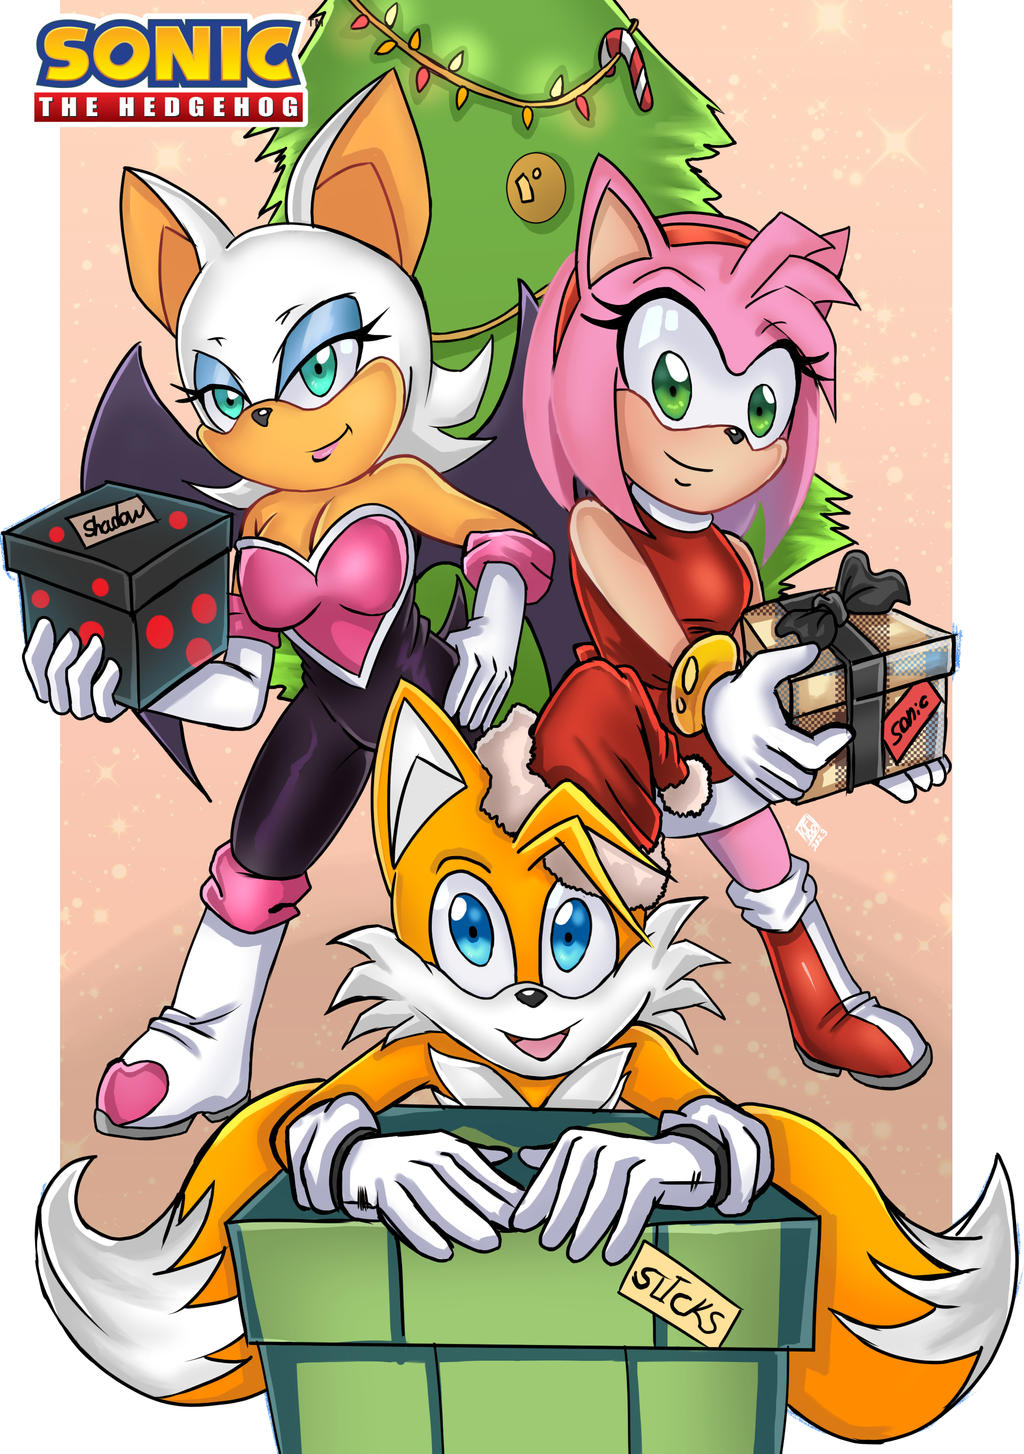 Sonic DS Light Games Collection by Day-Week on DeviantArt